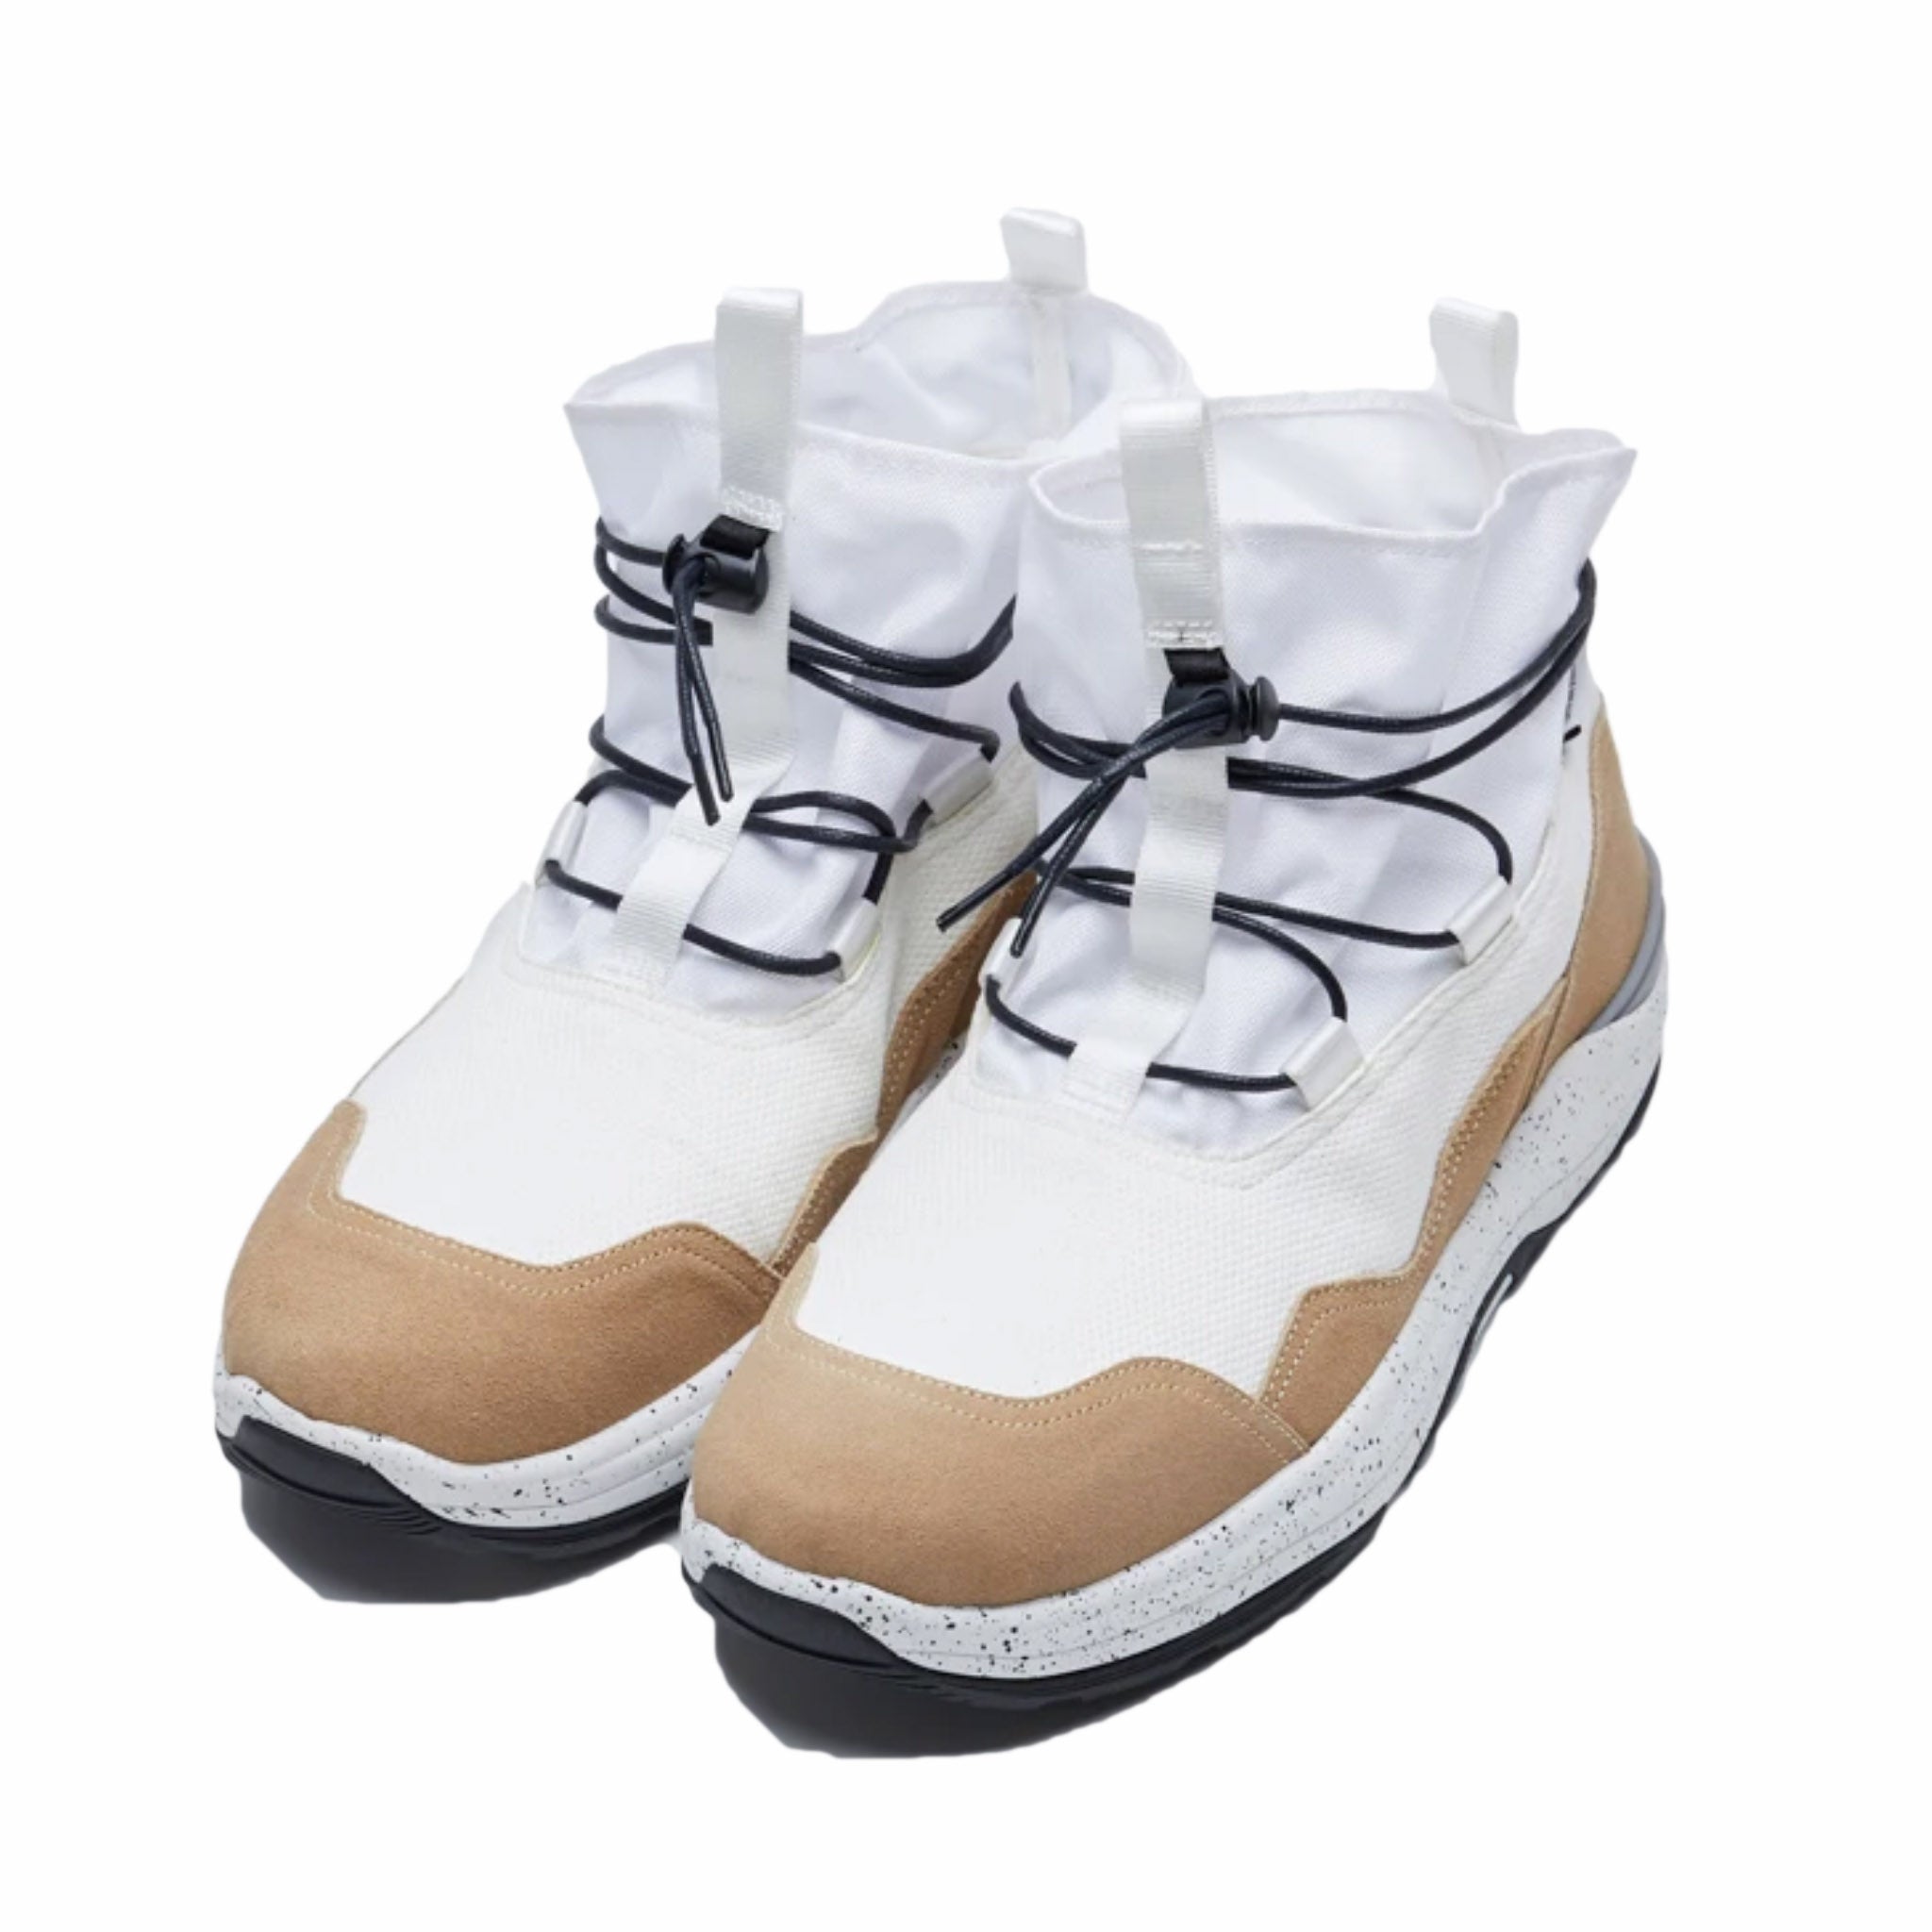 Suicoke ROBBS-ab Boots (White/Beige) – August